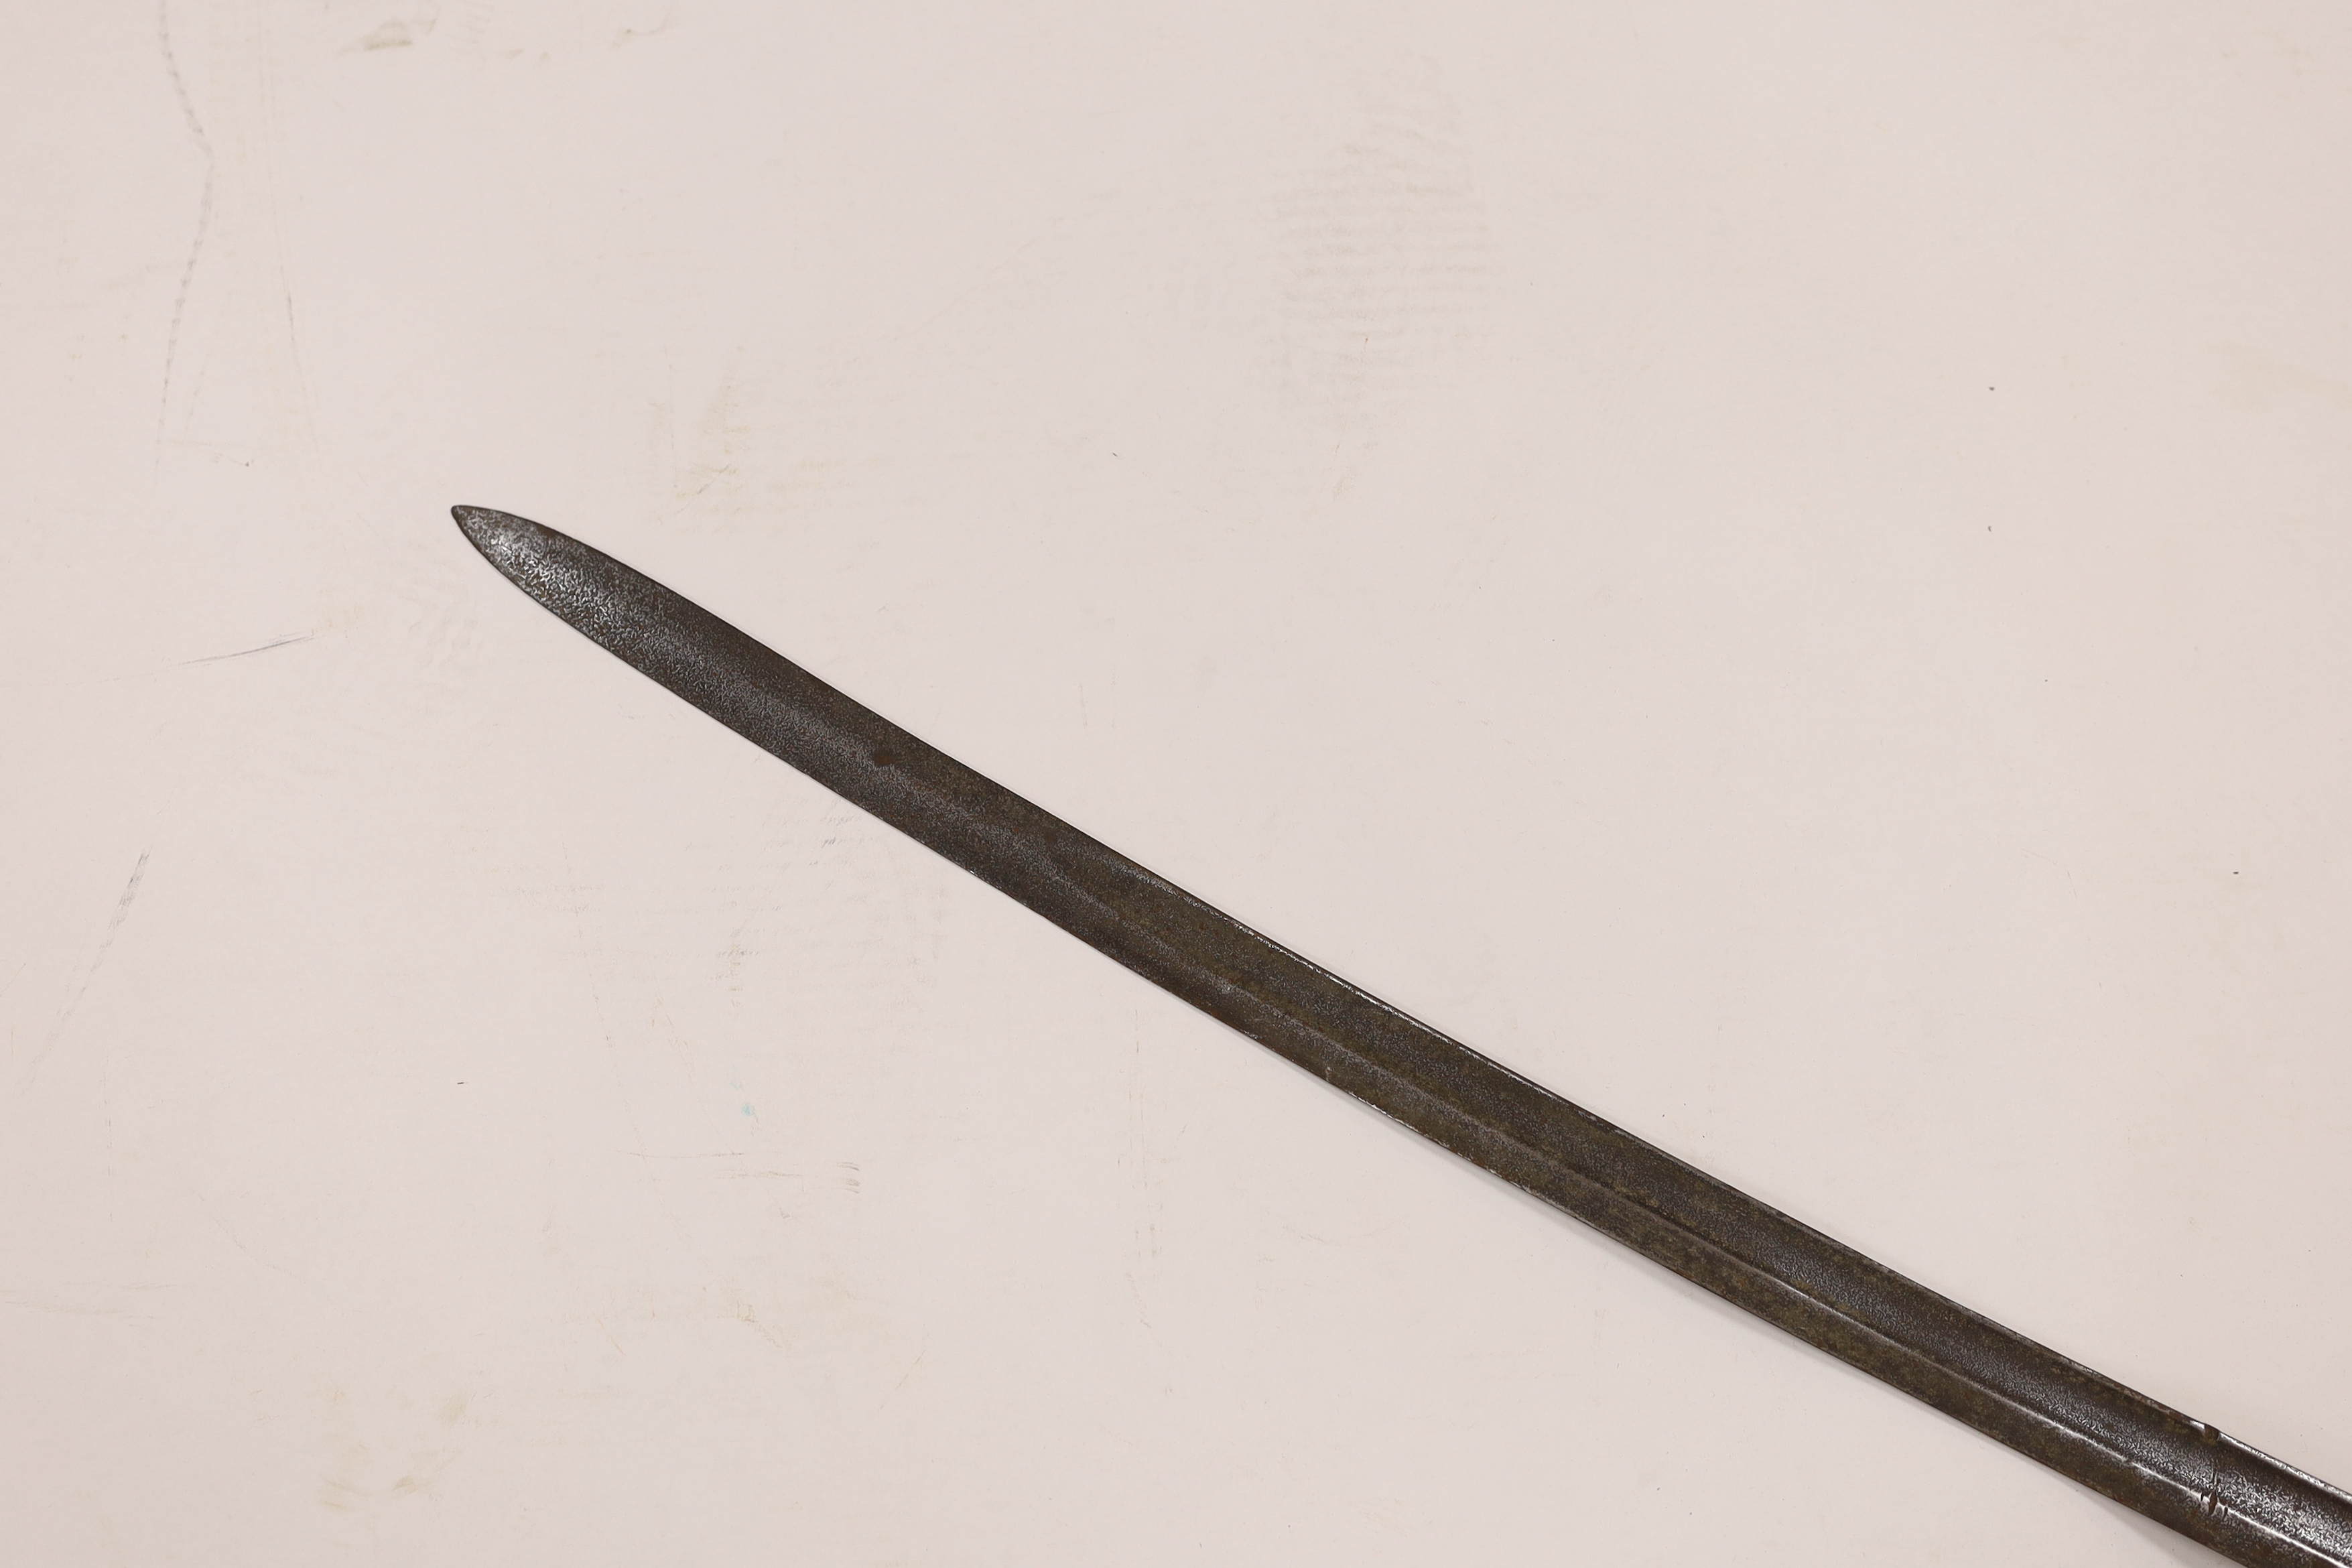 A German military sword with fullered blade and fish skin grip, blade 77cm